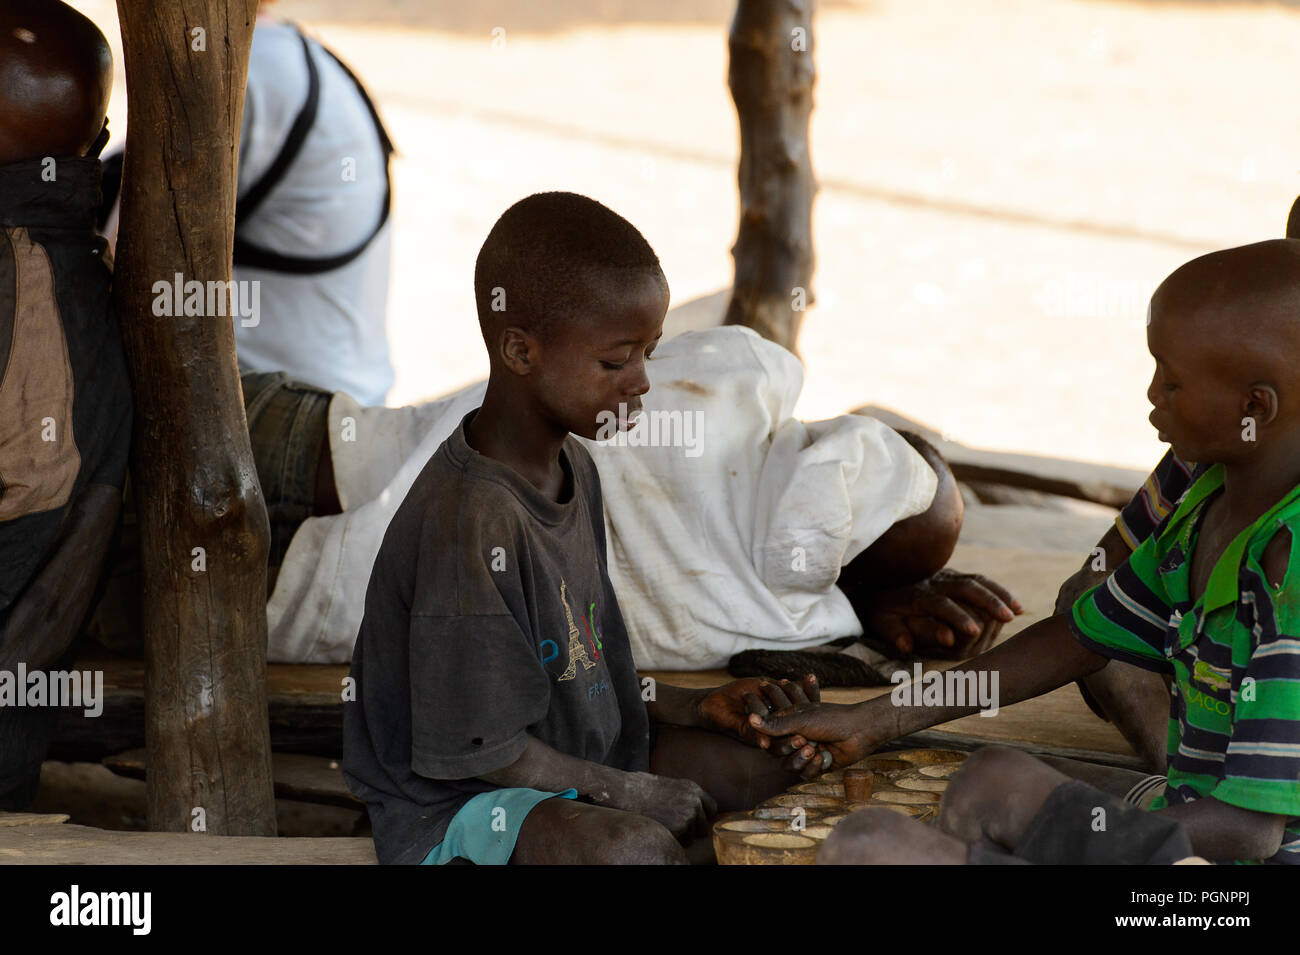 GHANI, GHANA - JAN 14, 2017: Unidentified Ghanaian boys play in the Ghani village. Ghana children suffer of poverty due to the bad economy. Stock Photo